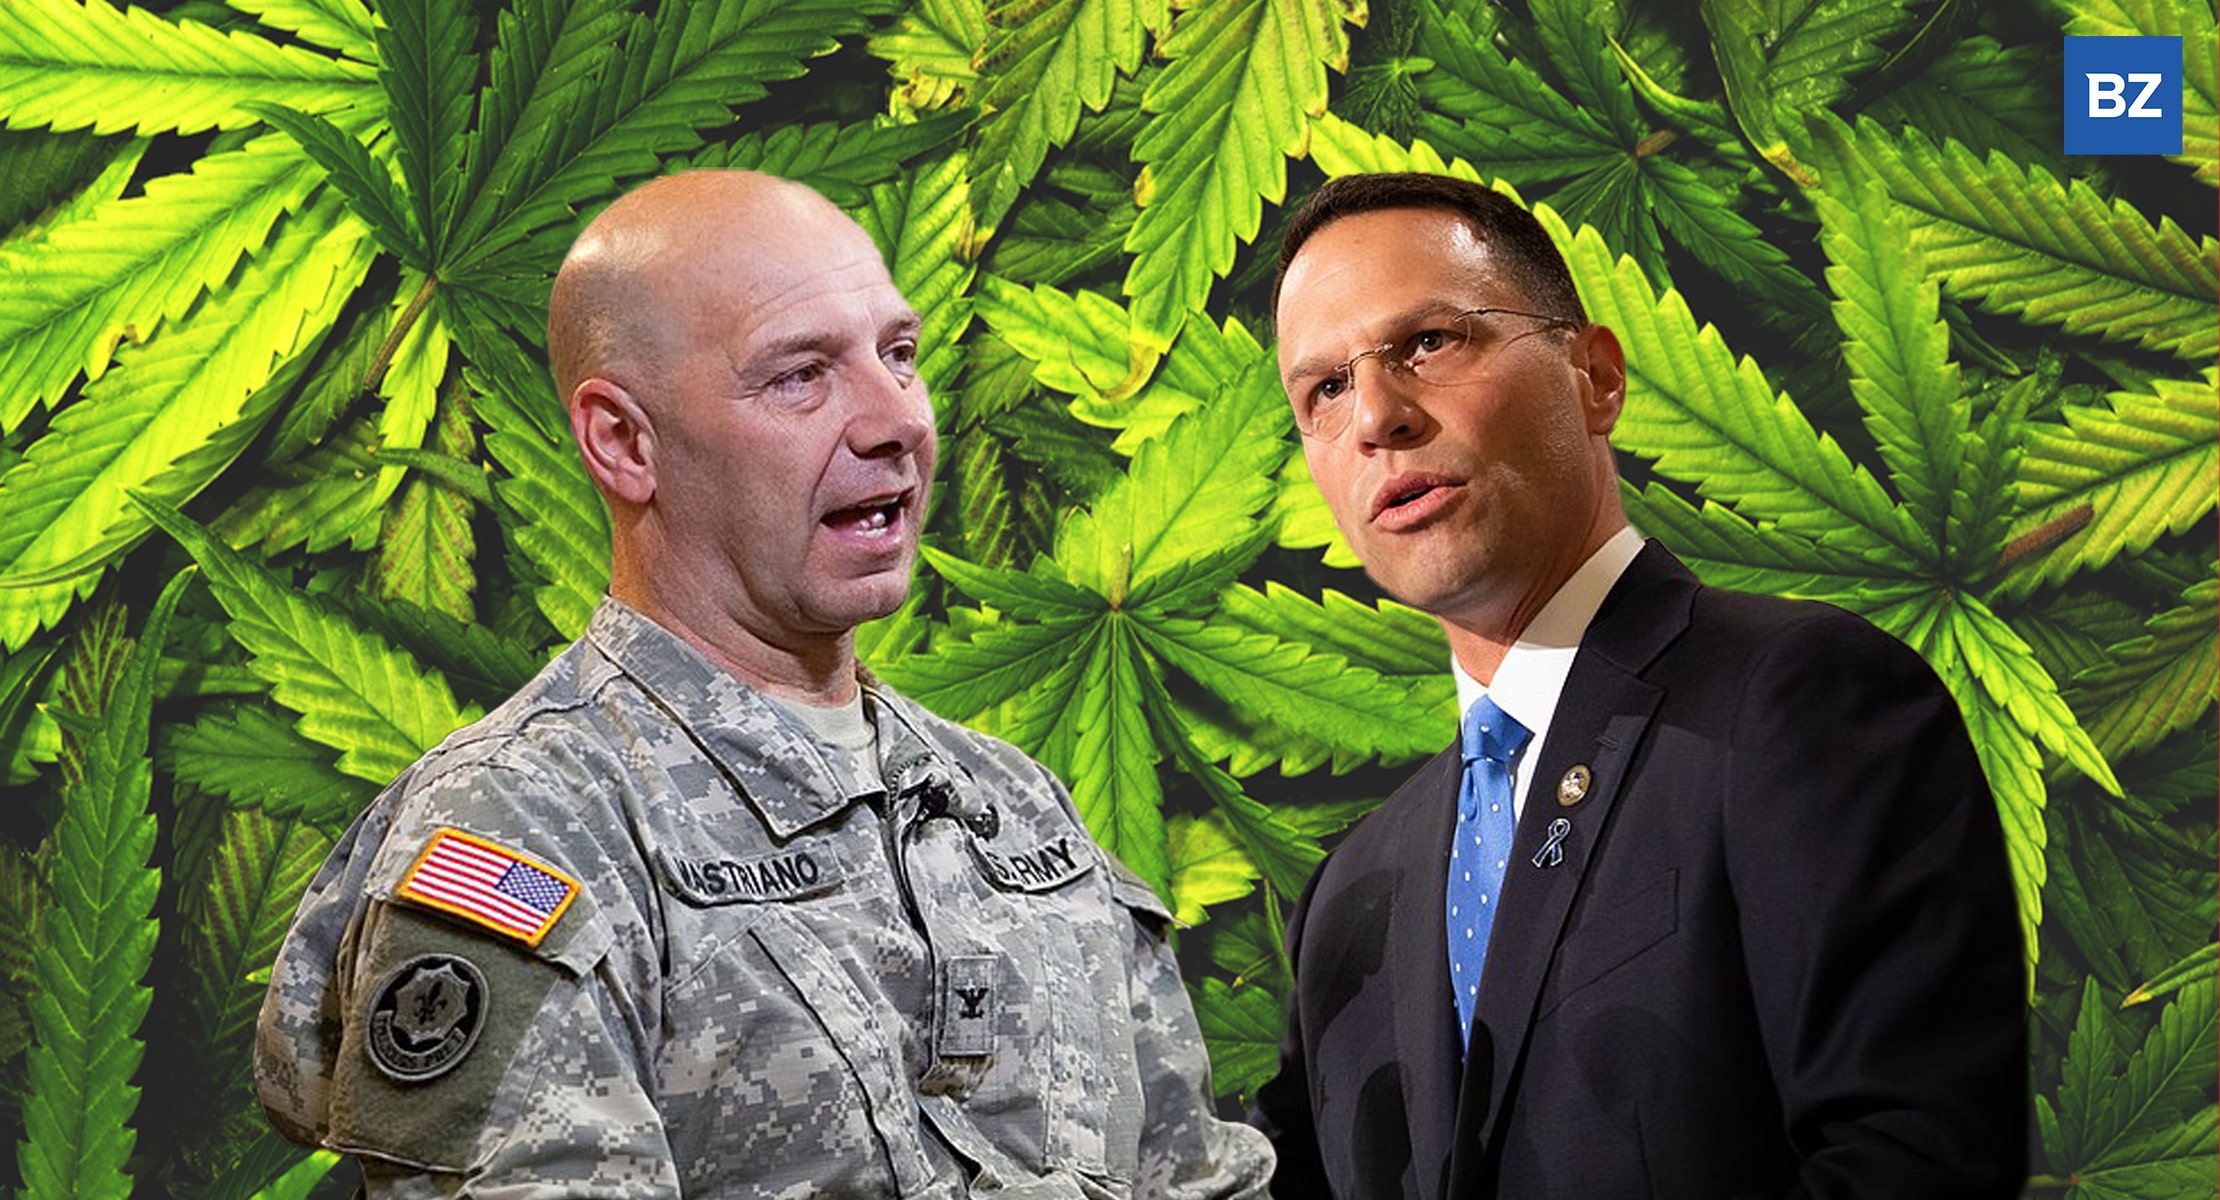 Criminalization Of Weed Is A 'Waste' Of Resources, Pennsylvania AG Says As Elections Approach